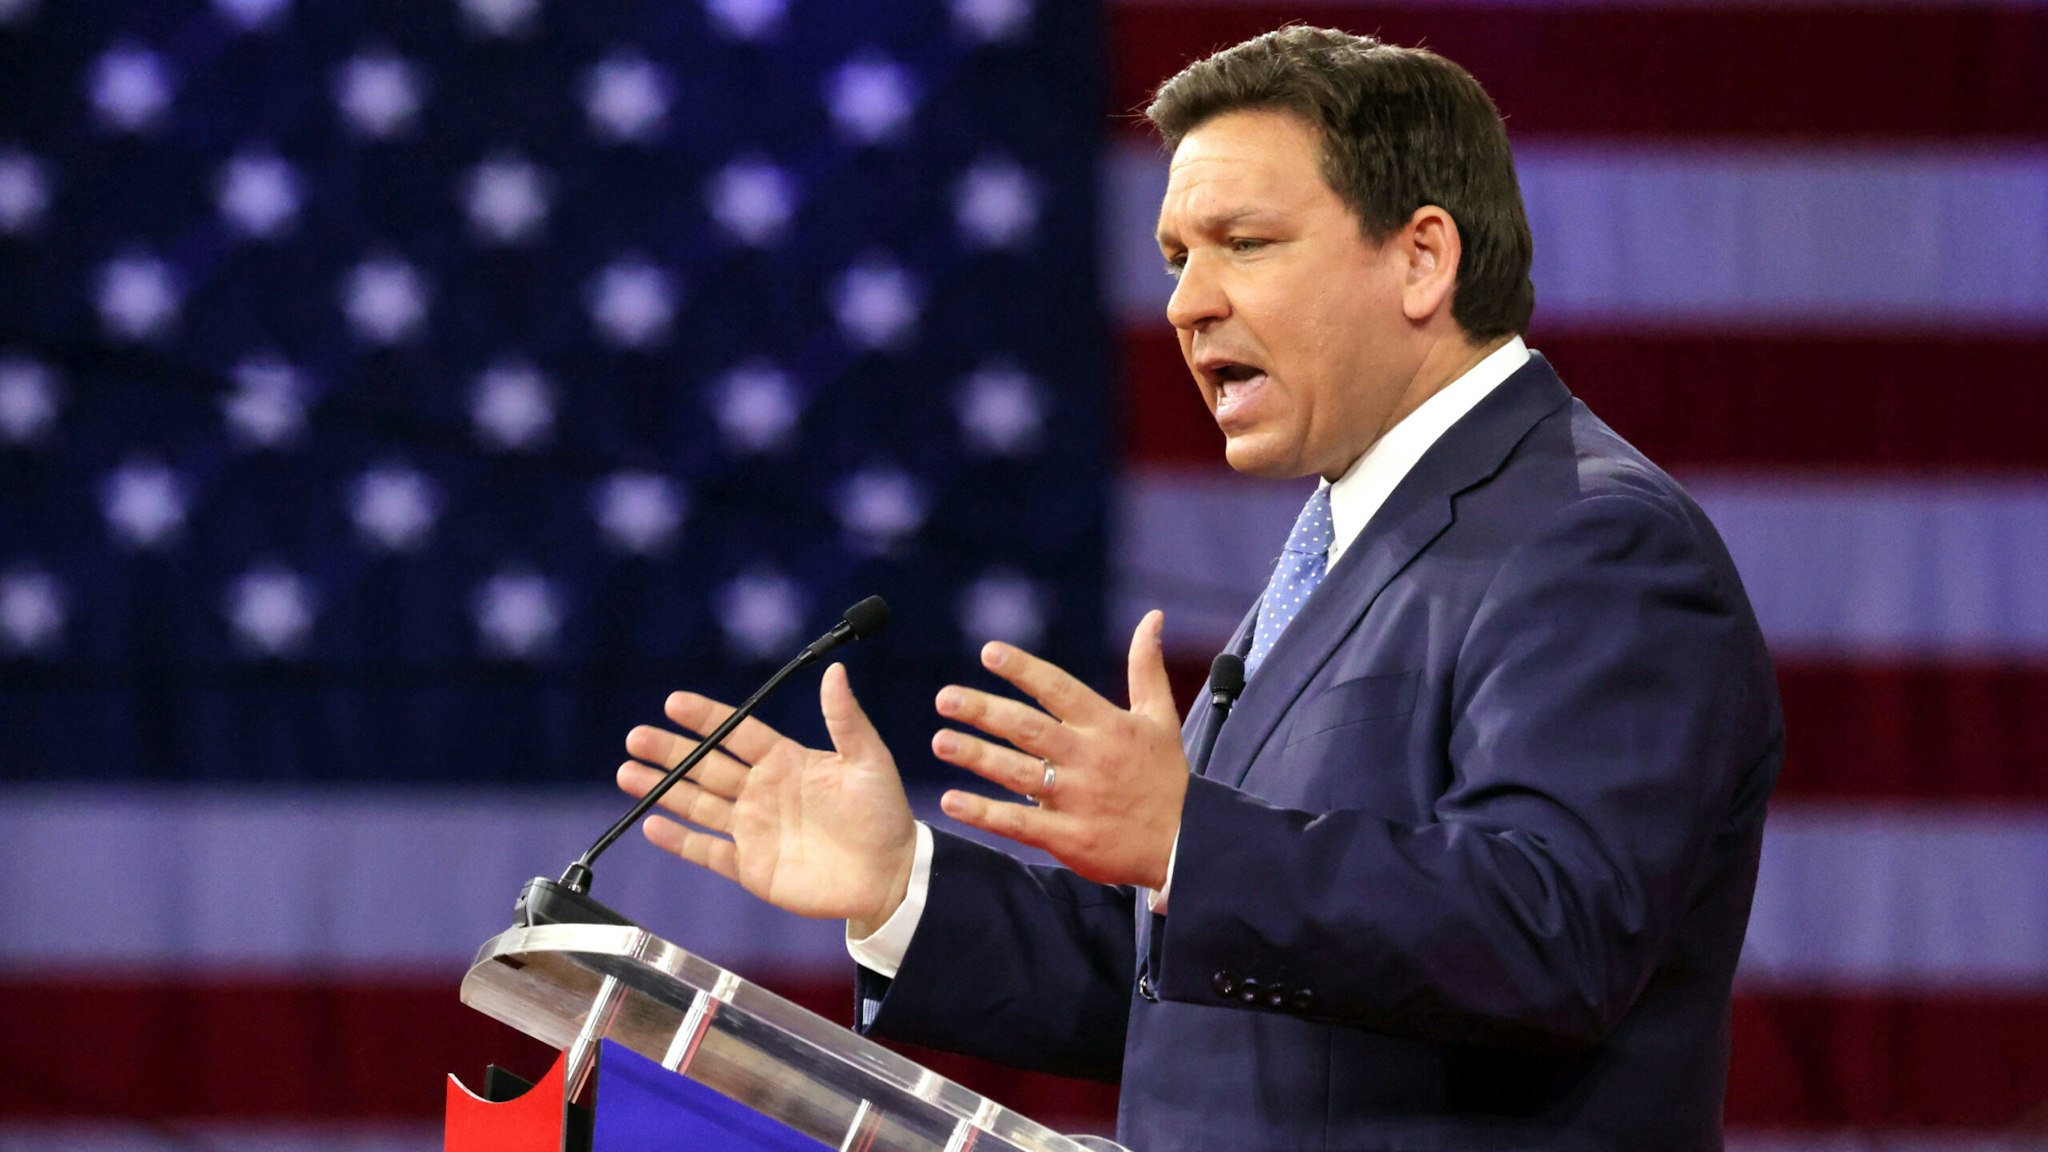 Florida Gov. Ron DeSantis delivers remarks at the 2022 CPAC conference at the Rosen Shingle Creek in Orlando, Florida, on Thursday, Feb. 24, 2022.